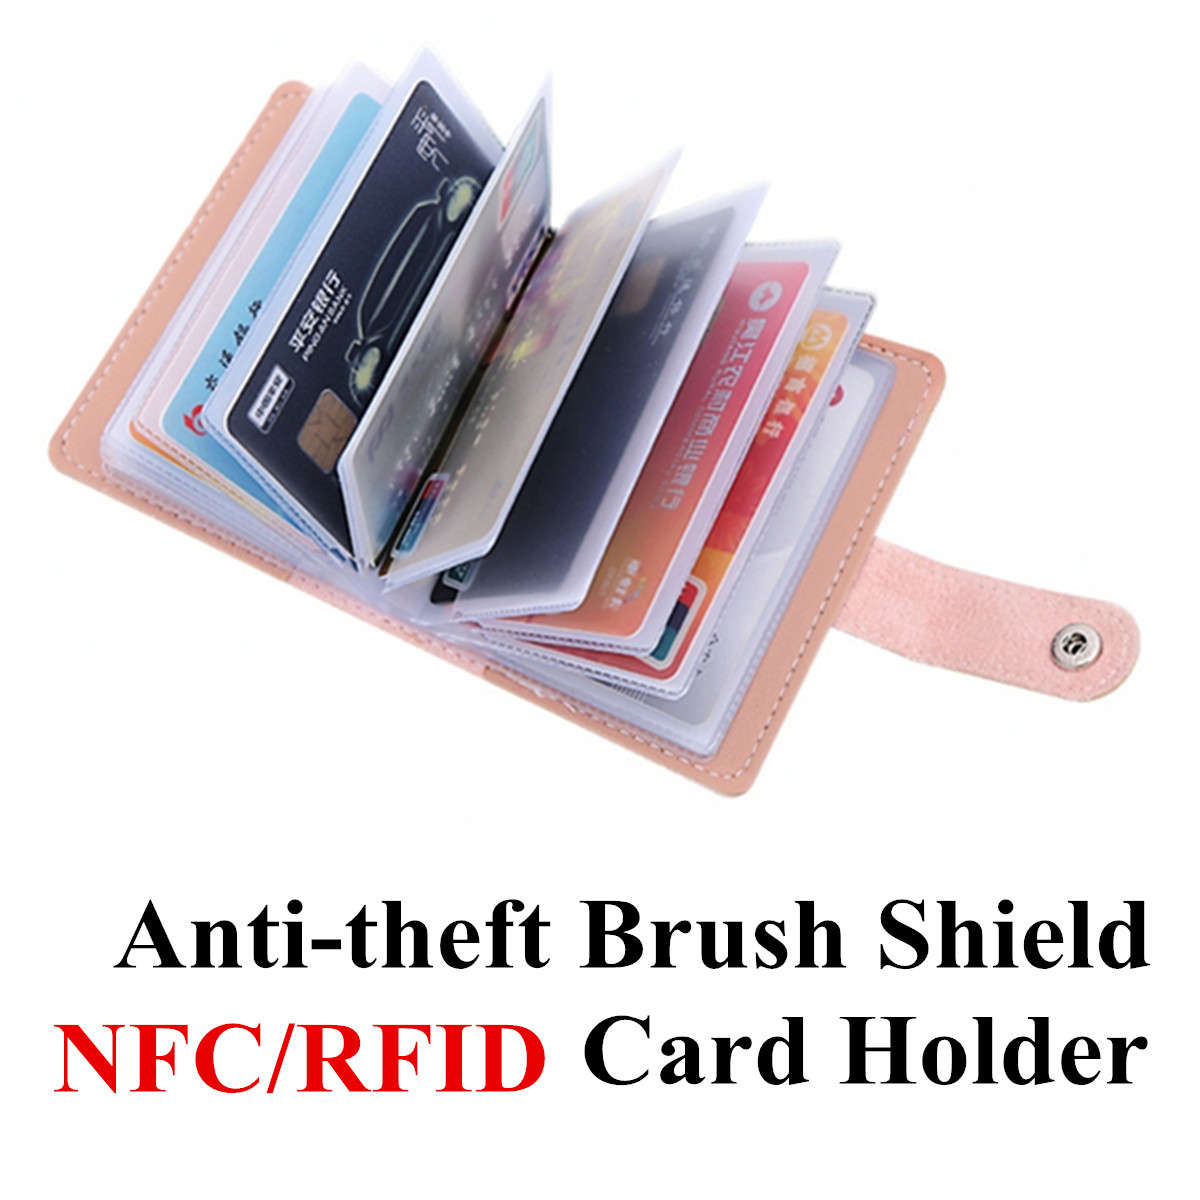 26-Card-Slots-Portable-Leather-Wallet-Anti-theft-Brush-Shield-NFCRFID-Card-Holder-1644277-3